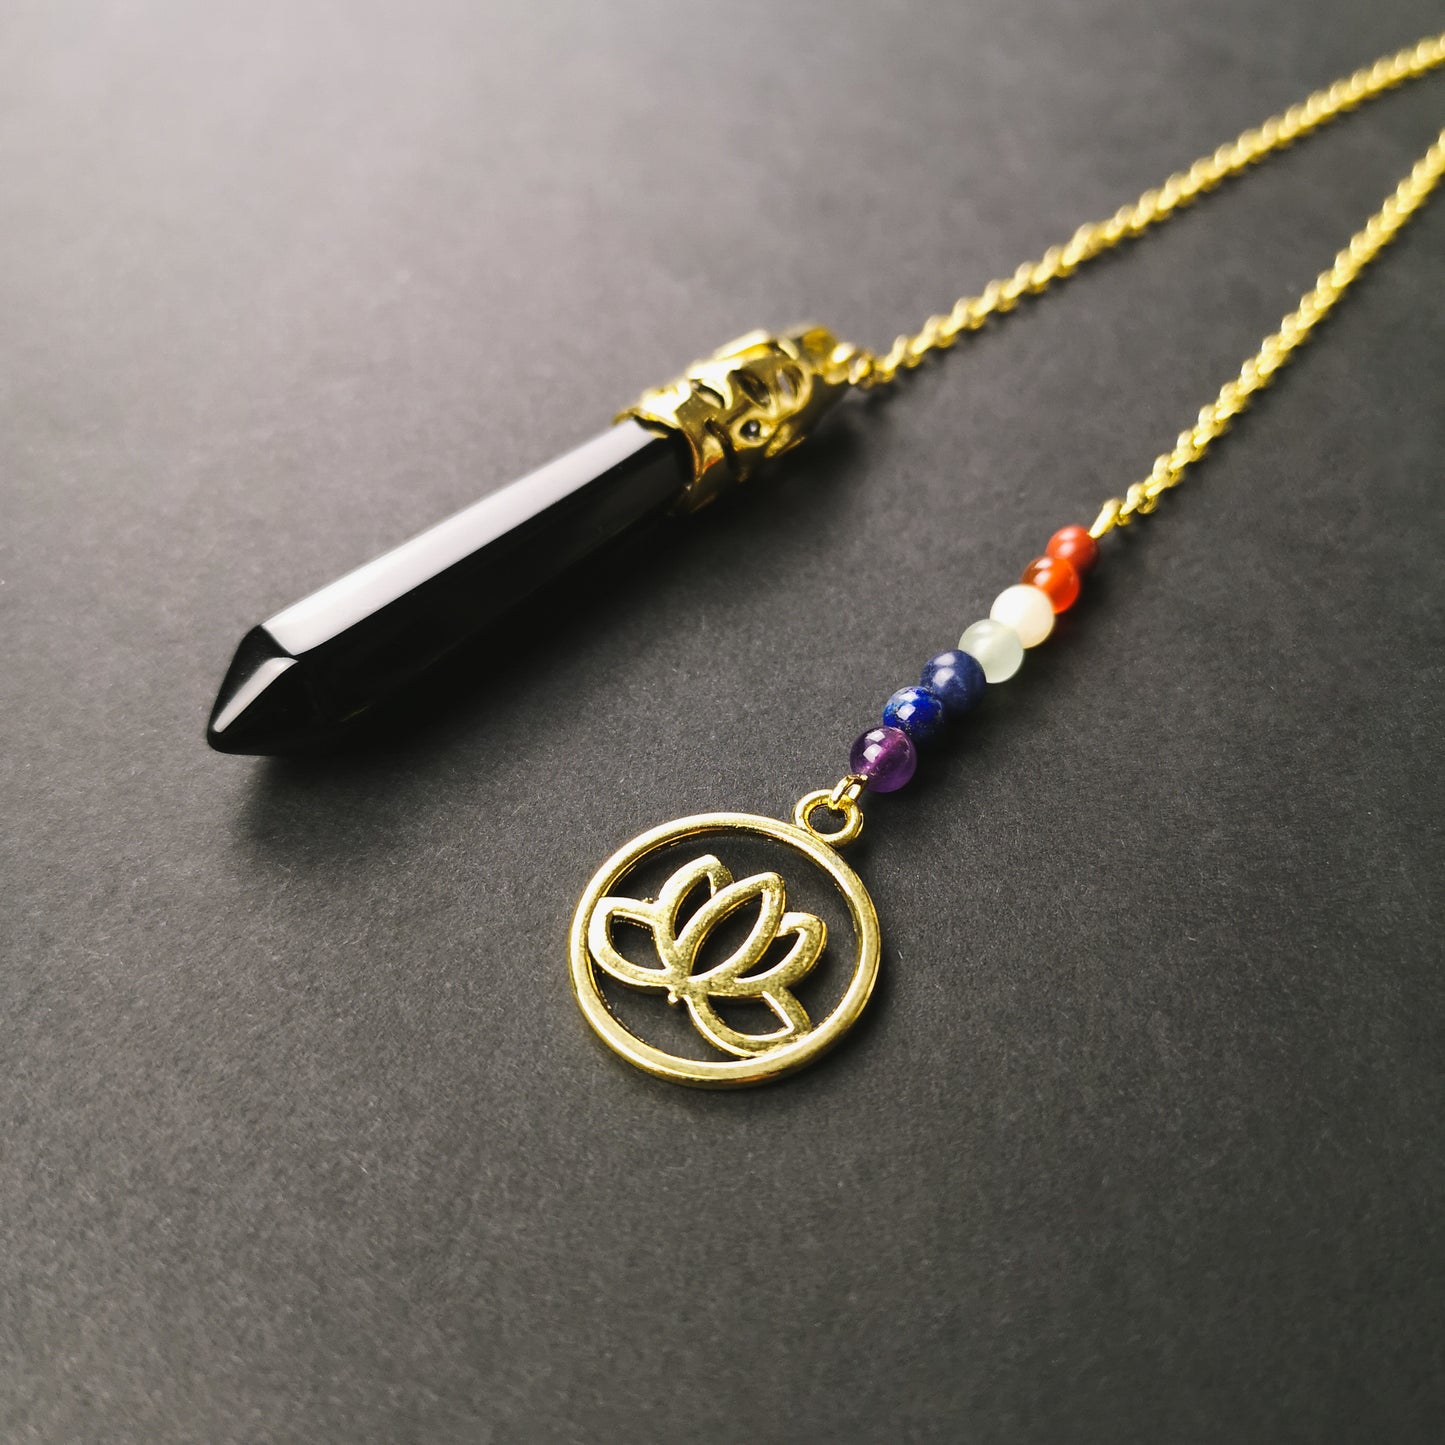 Golden onyx and seven chakras stones pendulum with a lotus charm - The French Witch shop